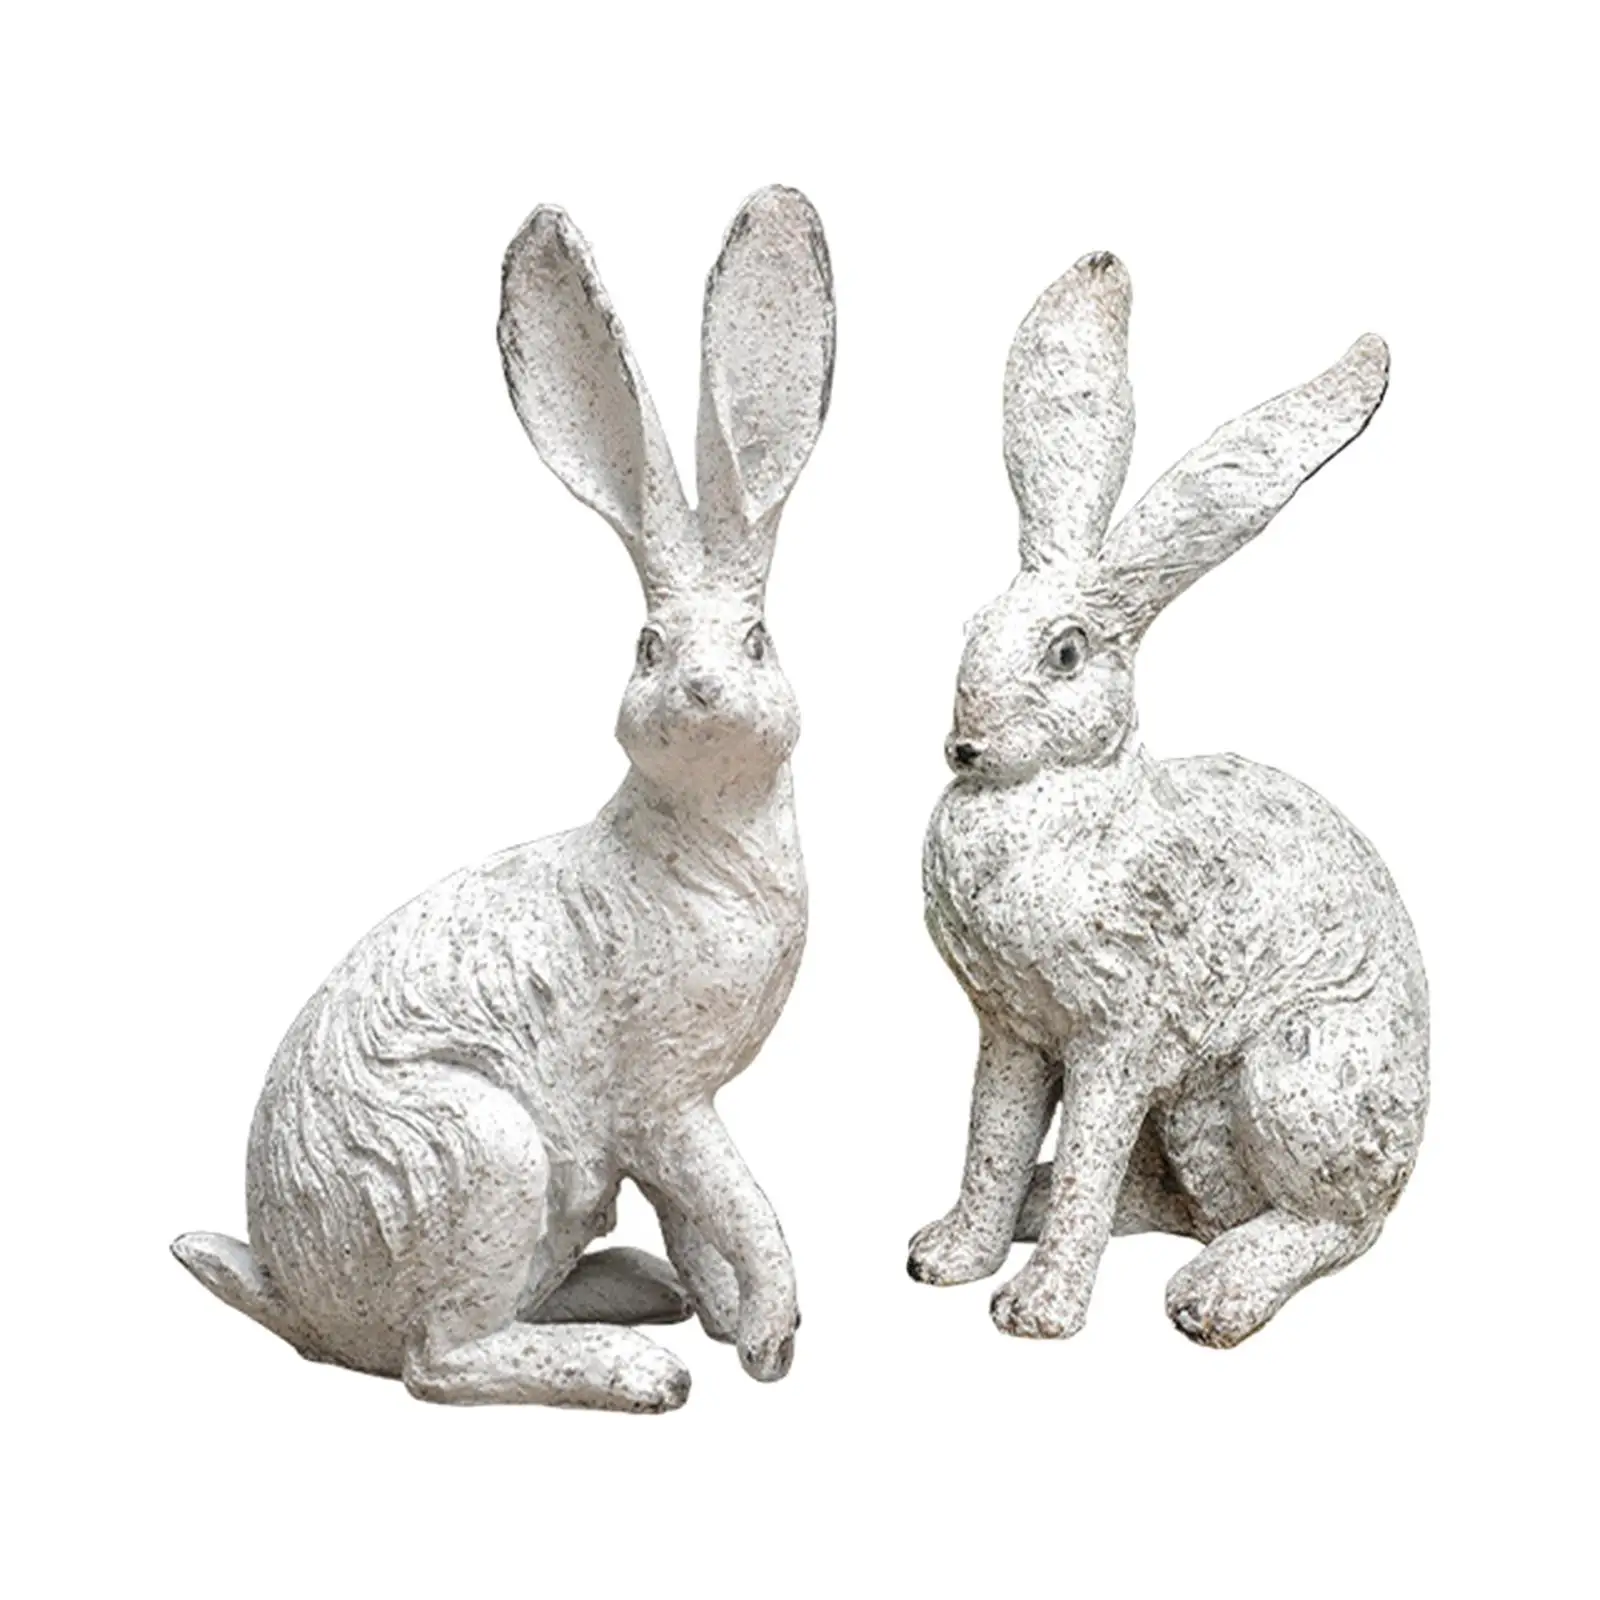 2x Desktop Ornaments Resin Statues Bunny Figurines Home Decor, Country Style Garden Decorations for Farmhouse,Outdoors,Office